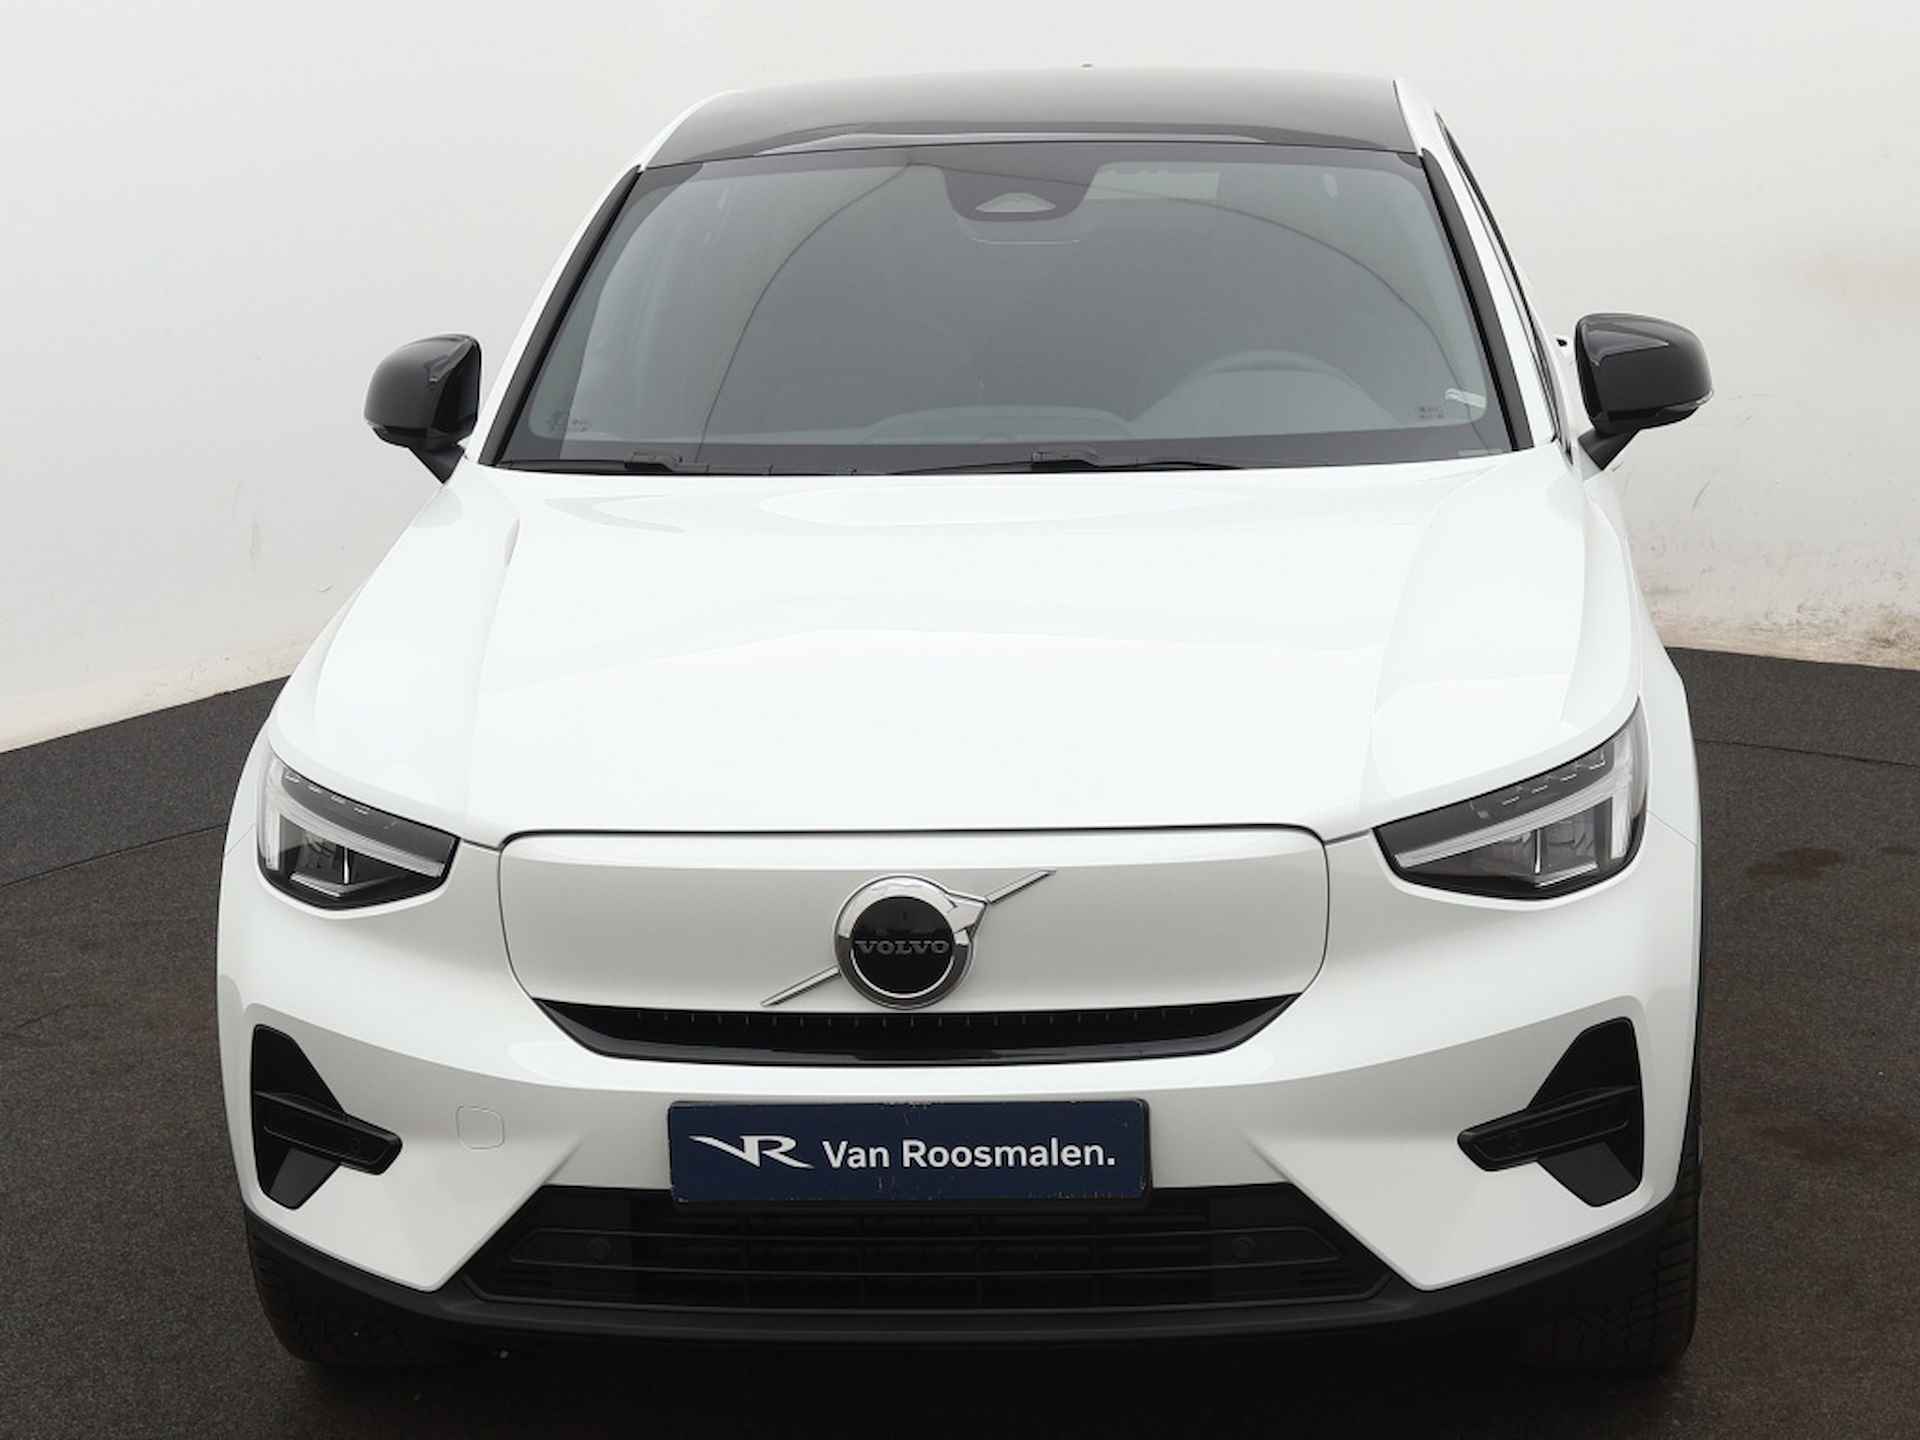 Volvo C40 Extended Plus 82 kWh - 9/47